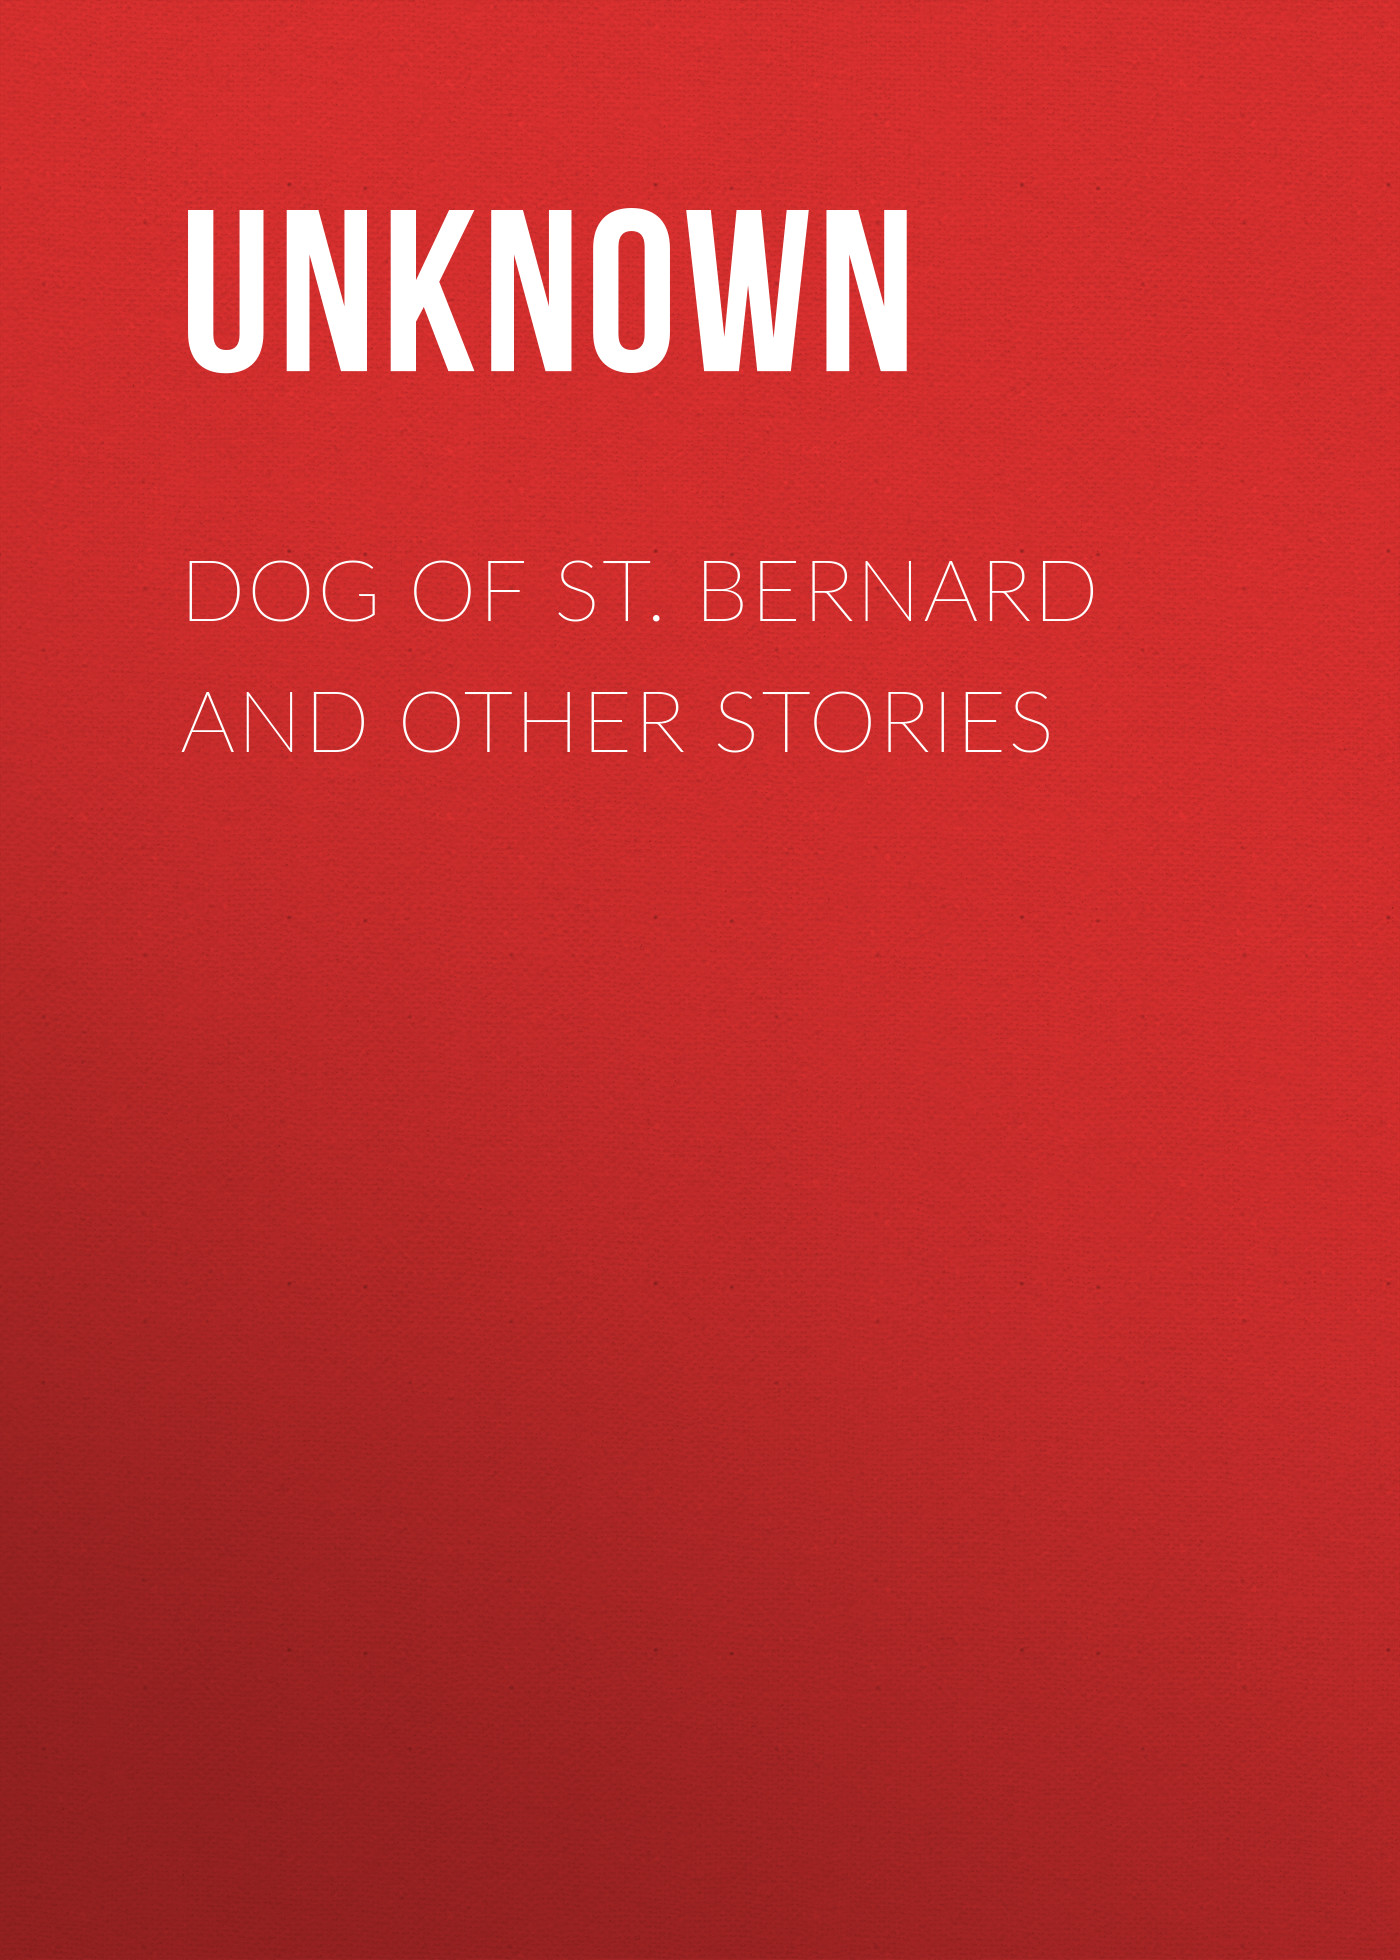 Dog of St. Bernard and Other Stories